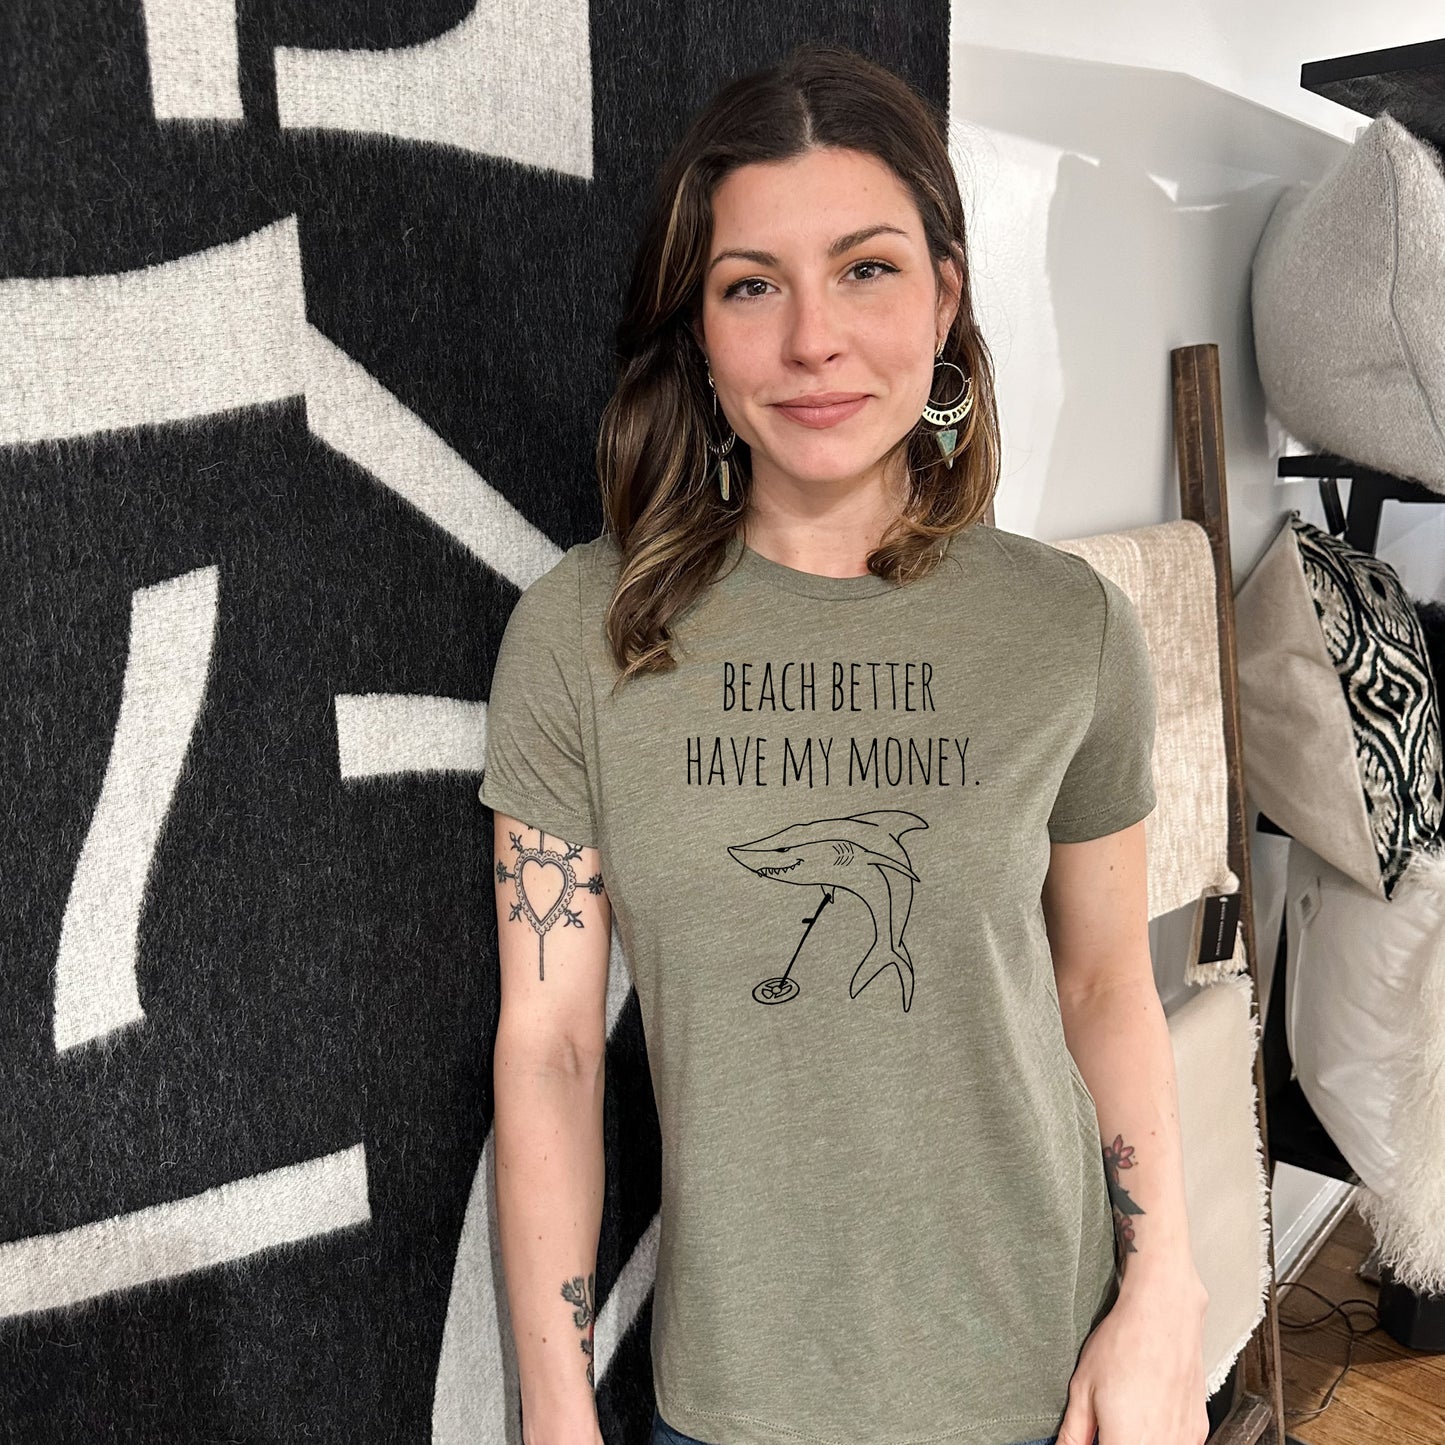 Beach Better Have My Money (Shark) - Women's Crew Tee - Olive or Dusty Blue